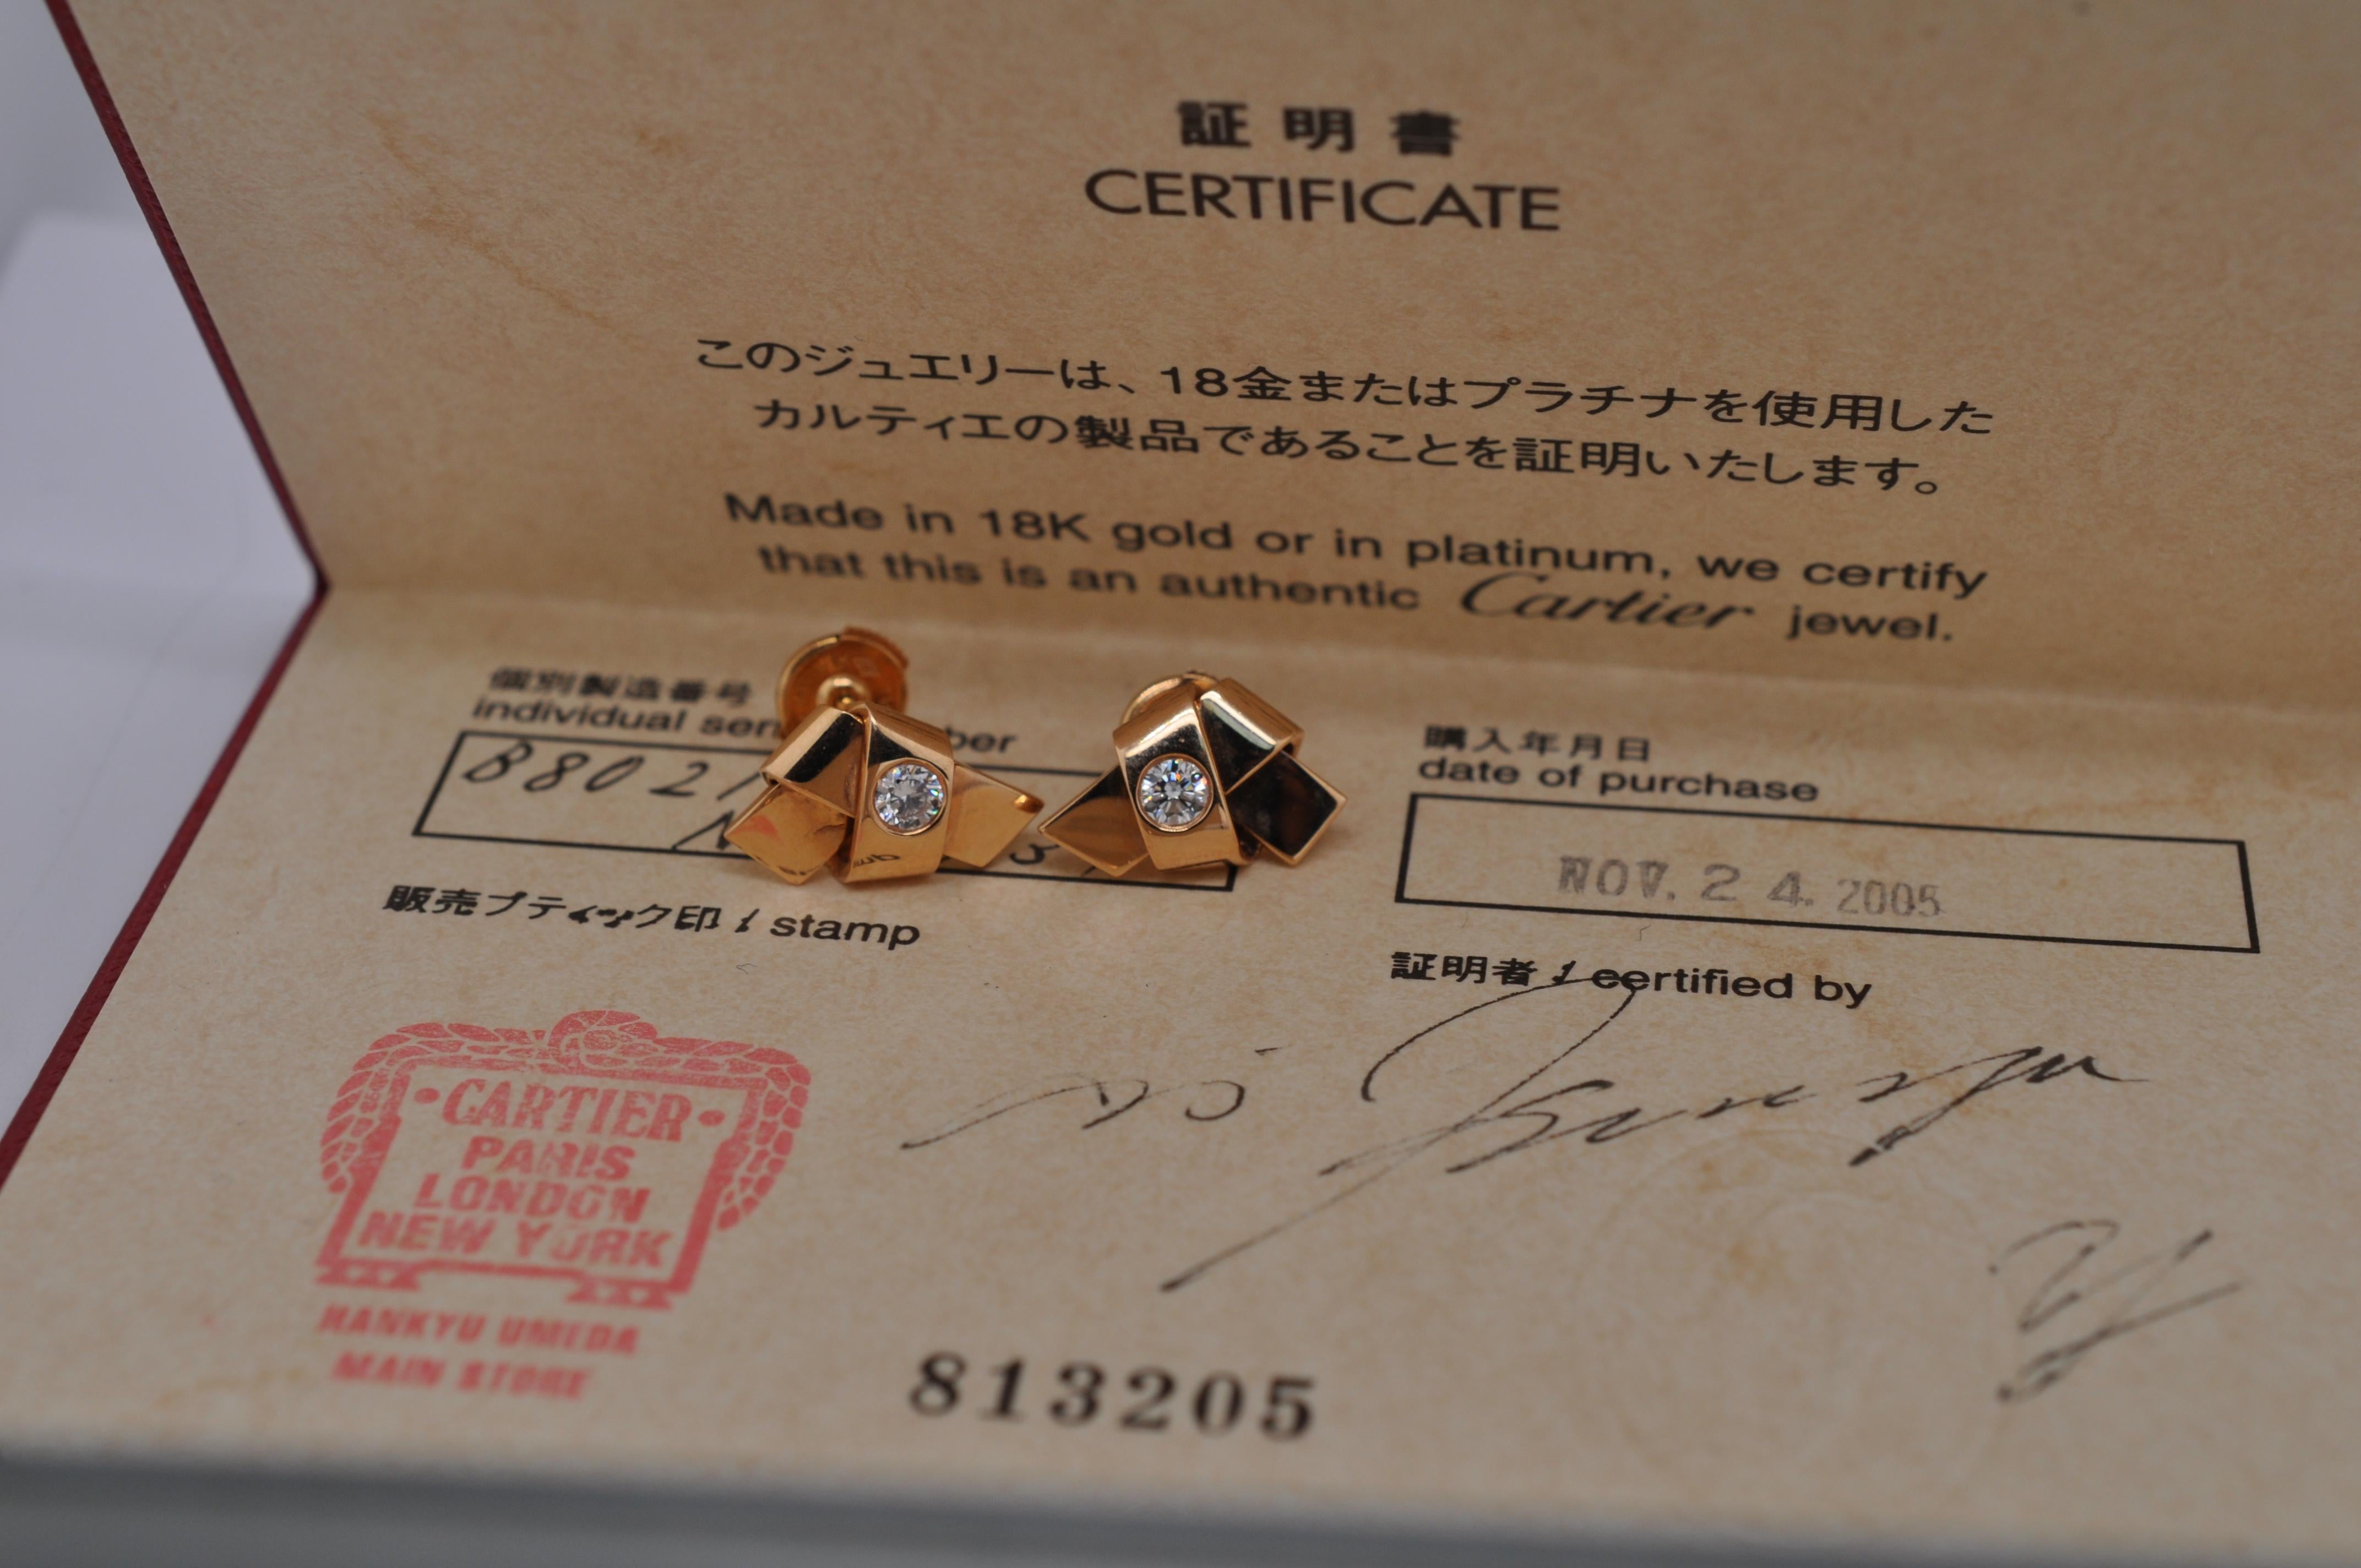 Brand: Cartier

Stones: Diamond 

Metal: Rose Gold

Style: Ribbon Knot Stud Earrings

Hallmarked: Cartier 750

Papers: Yes

Year: 2005

Condition: Very Good